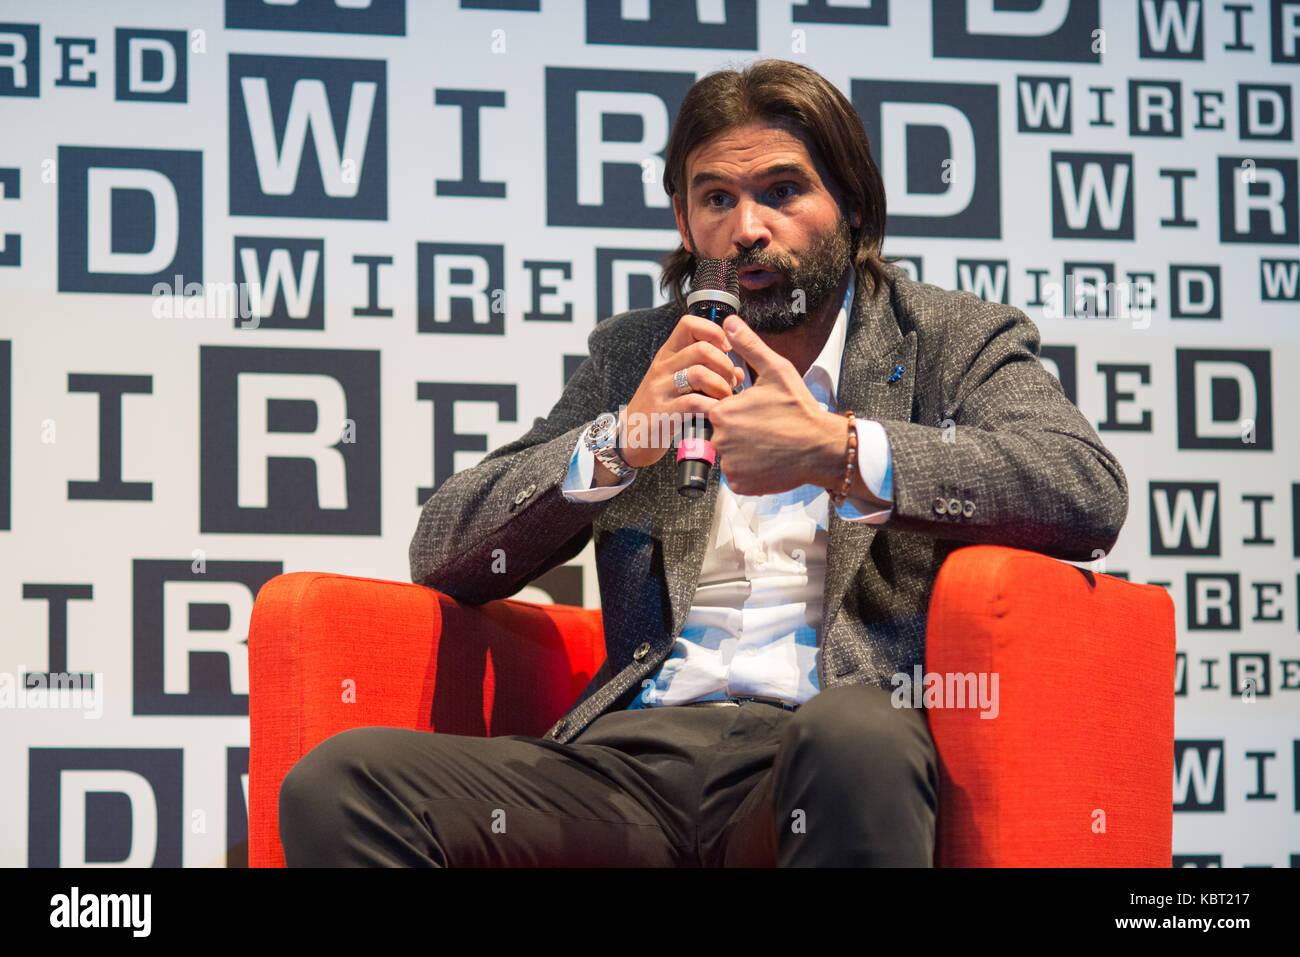 Florence, Italy. 30 Sept, 2017. Daniele Adani, is a retired Italian footballer and a sky sport columnist, interviewed at Wired Next Fest 2017 in The Sala d'arme of Palazzo Vecchio in Florence, Italy. Credit: Mario Carovani/Alamy Live News. Stock Photo